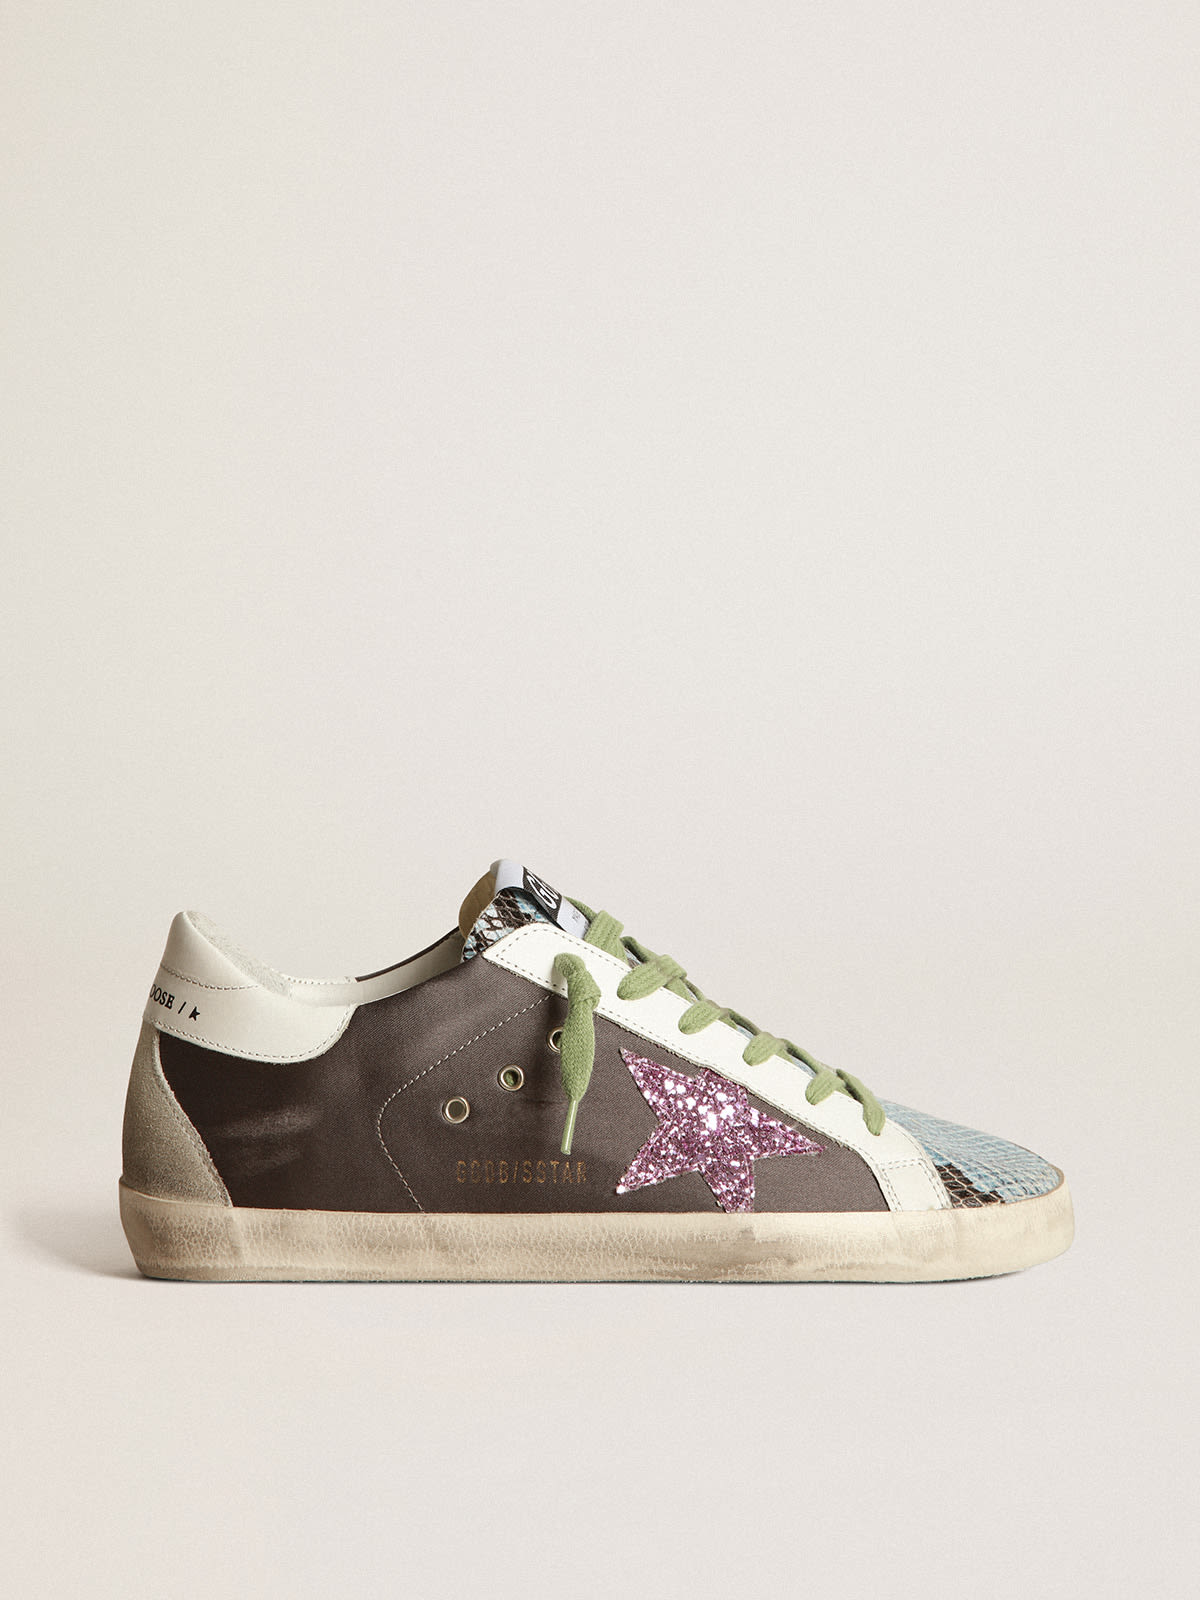 Golden Goose - Grey and python-print Superstar sneakers with glittery star in 